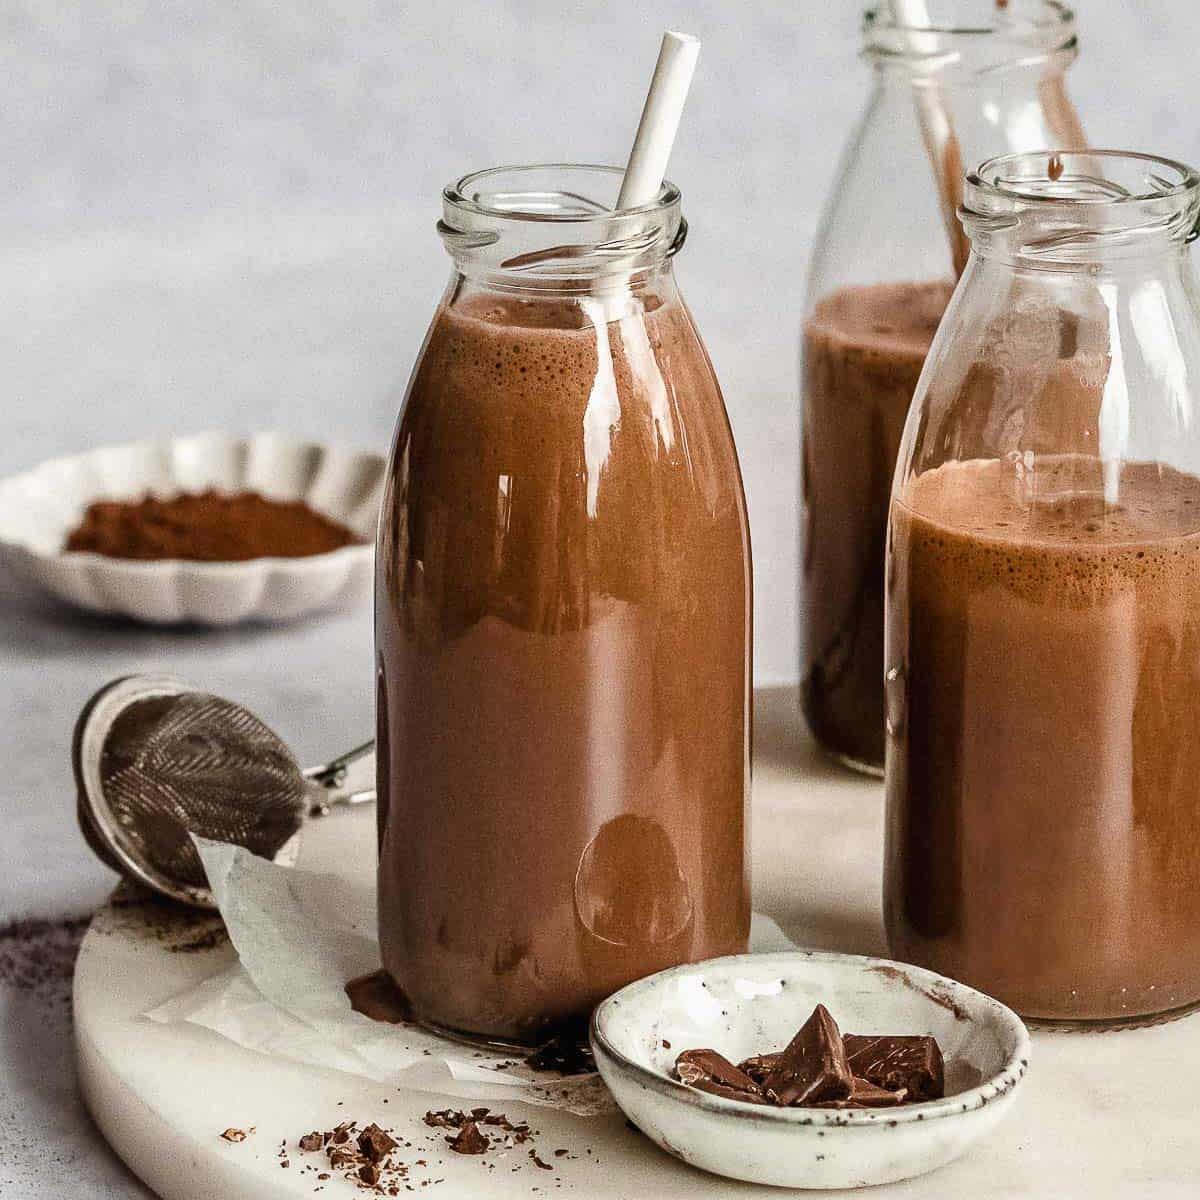 Chocolate milk is a drink that helps you relieve stress